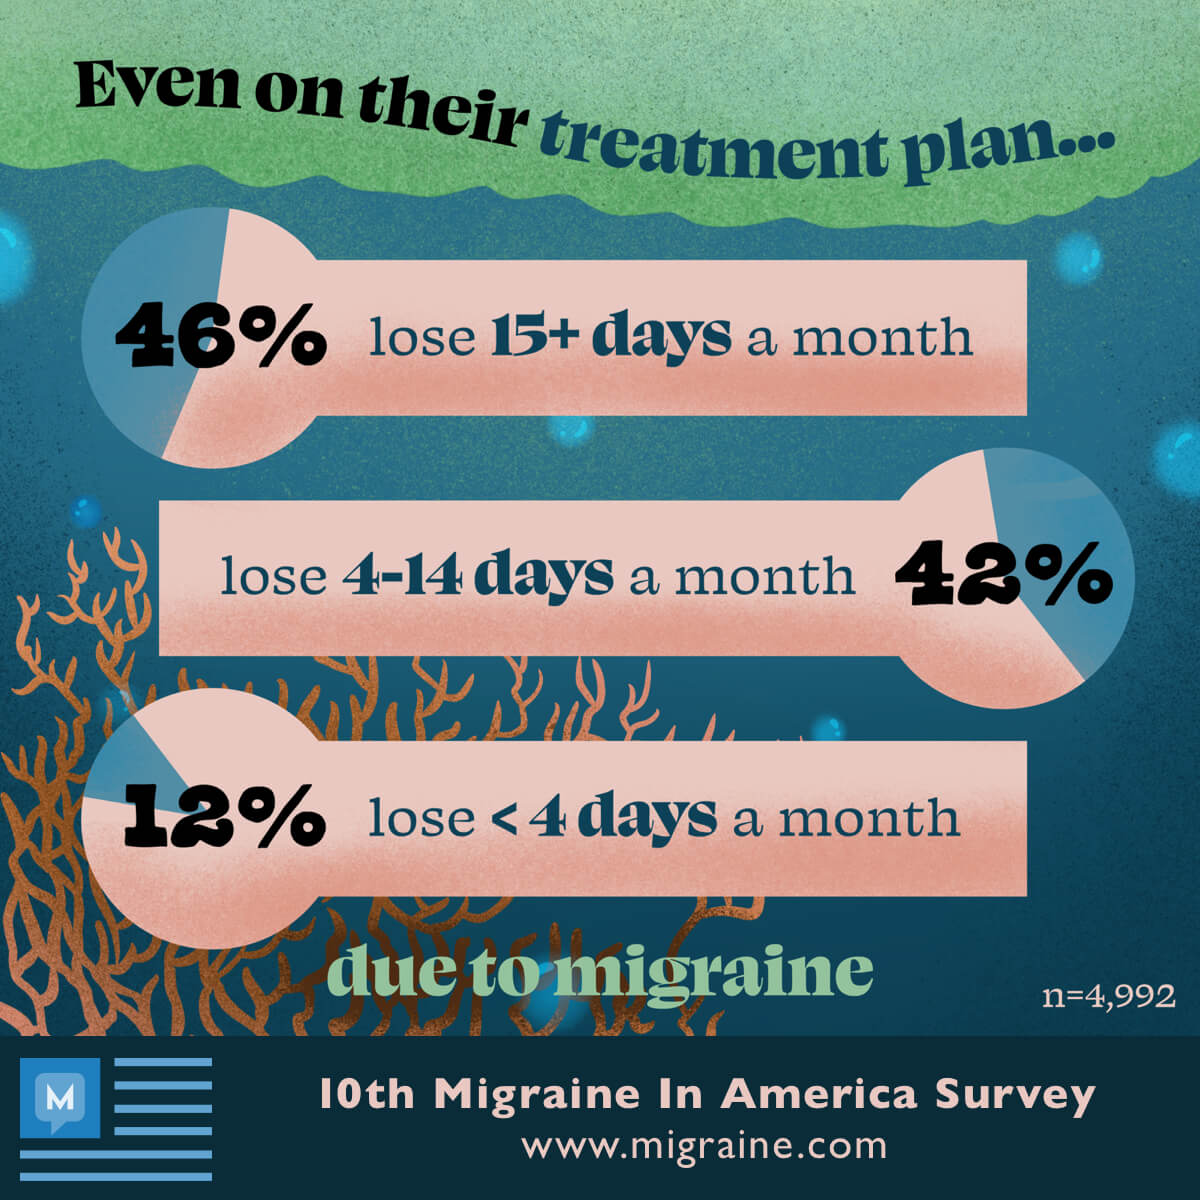 46% of Migraine In America Survey respondents lose 15+ days a month to migraine even on treatment.